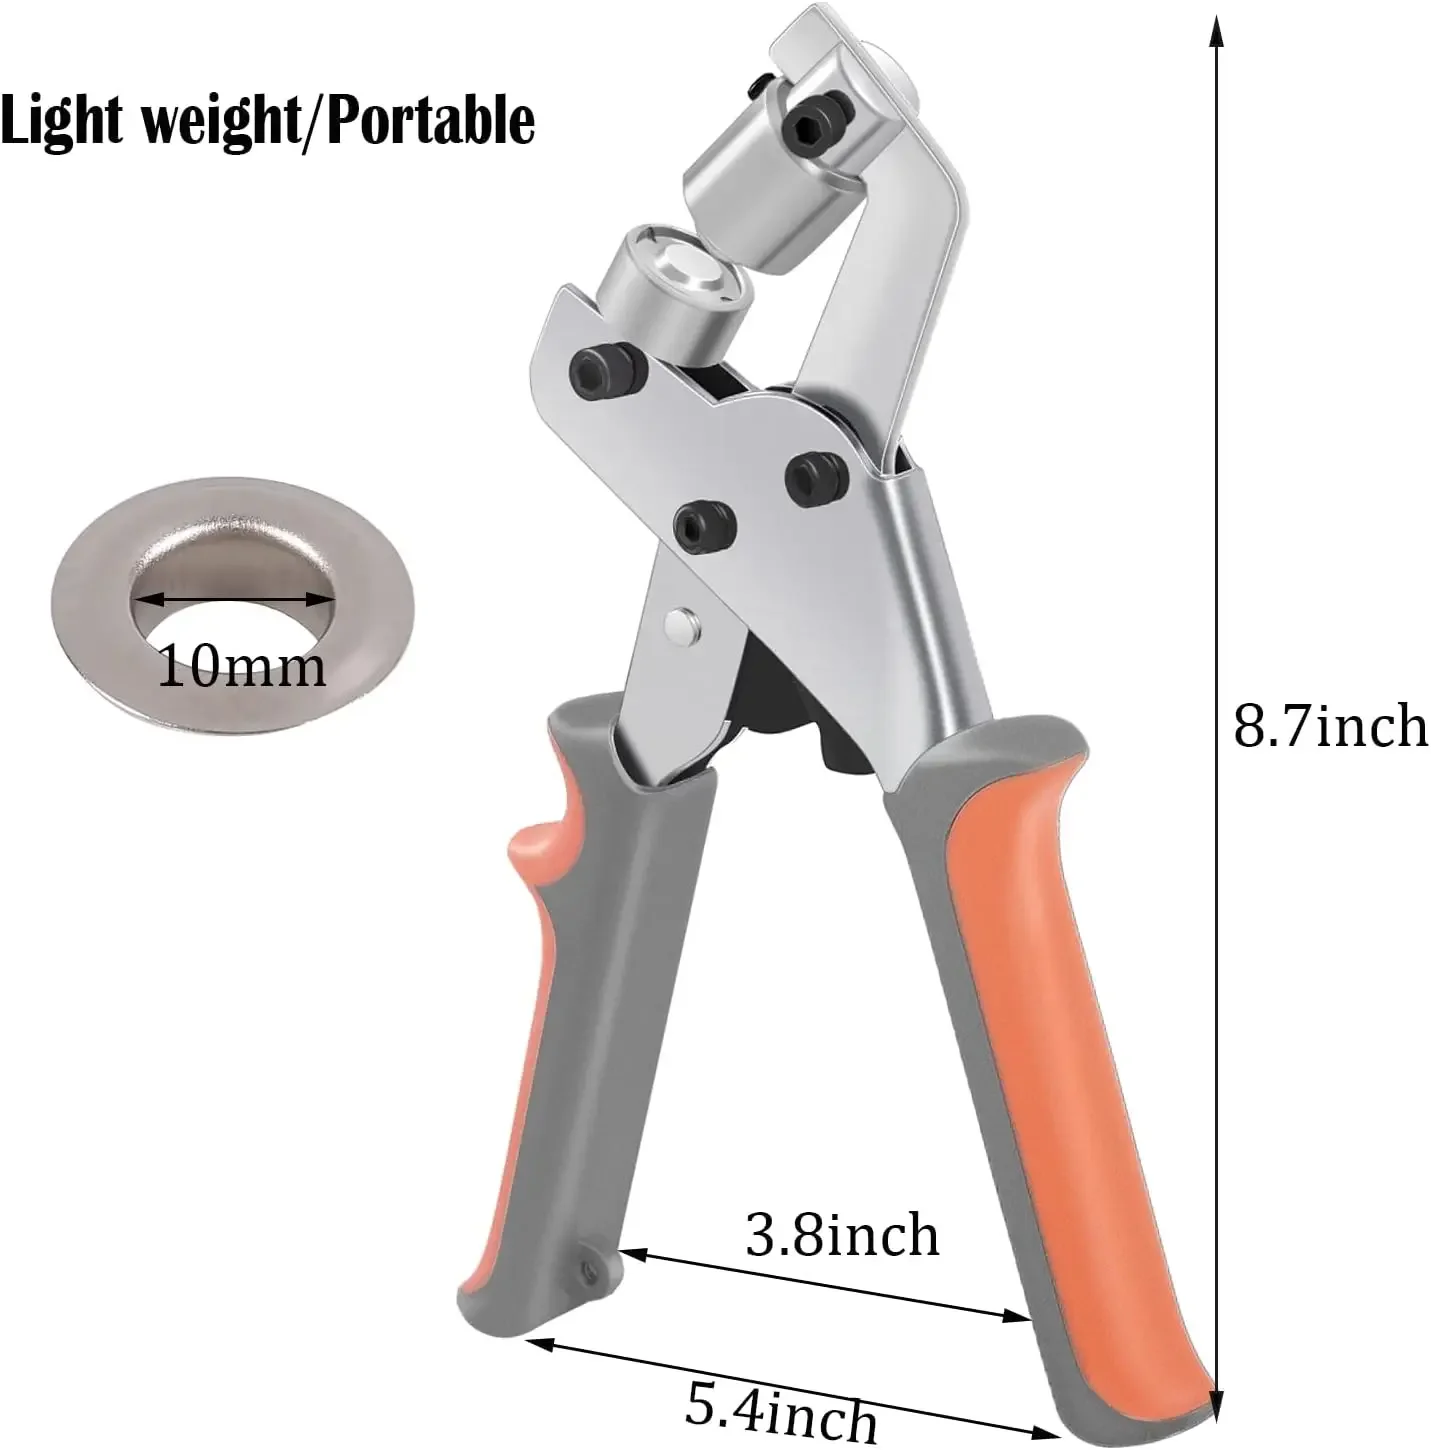 

Grommets 500pcs Portable Pliers Punch Press Silver W/ Hole Handheld Machine 3/8 Tool Manual Of Grommet Hand Puncher Kit